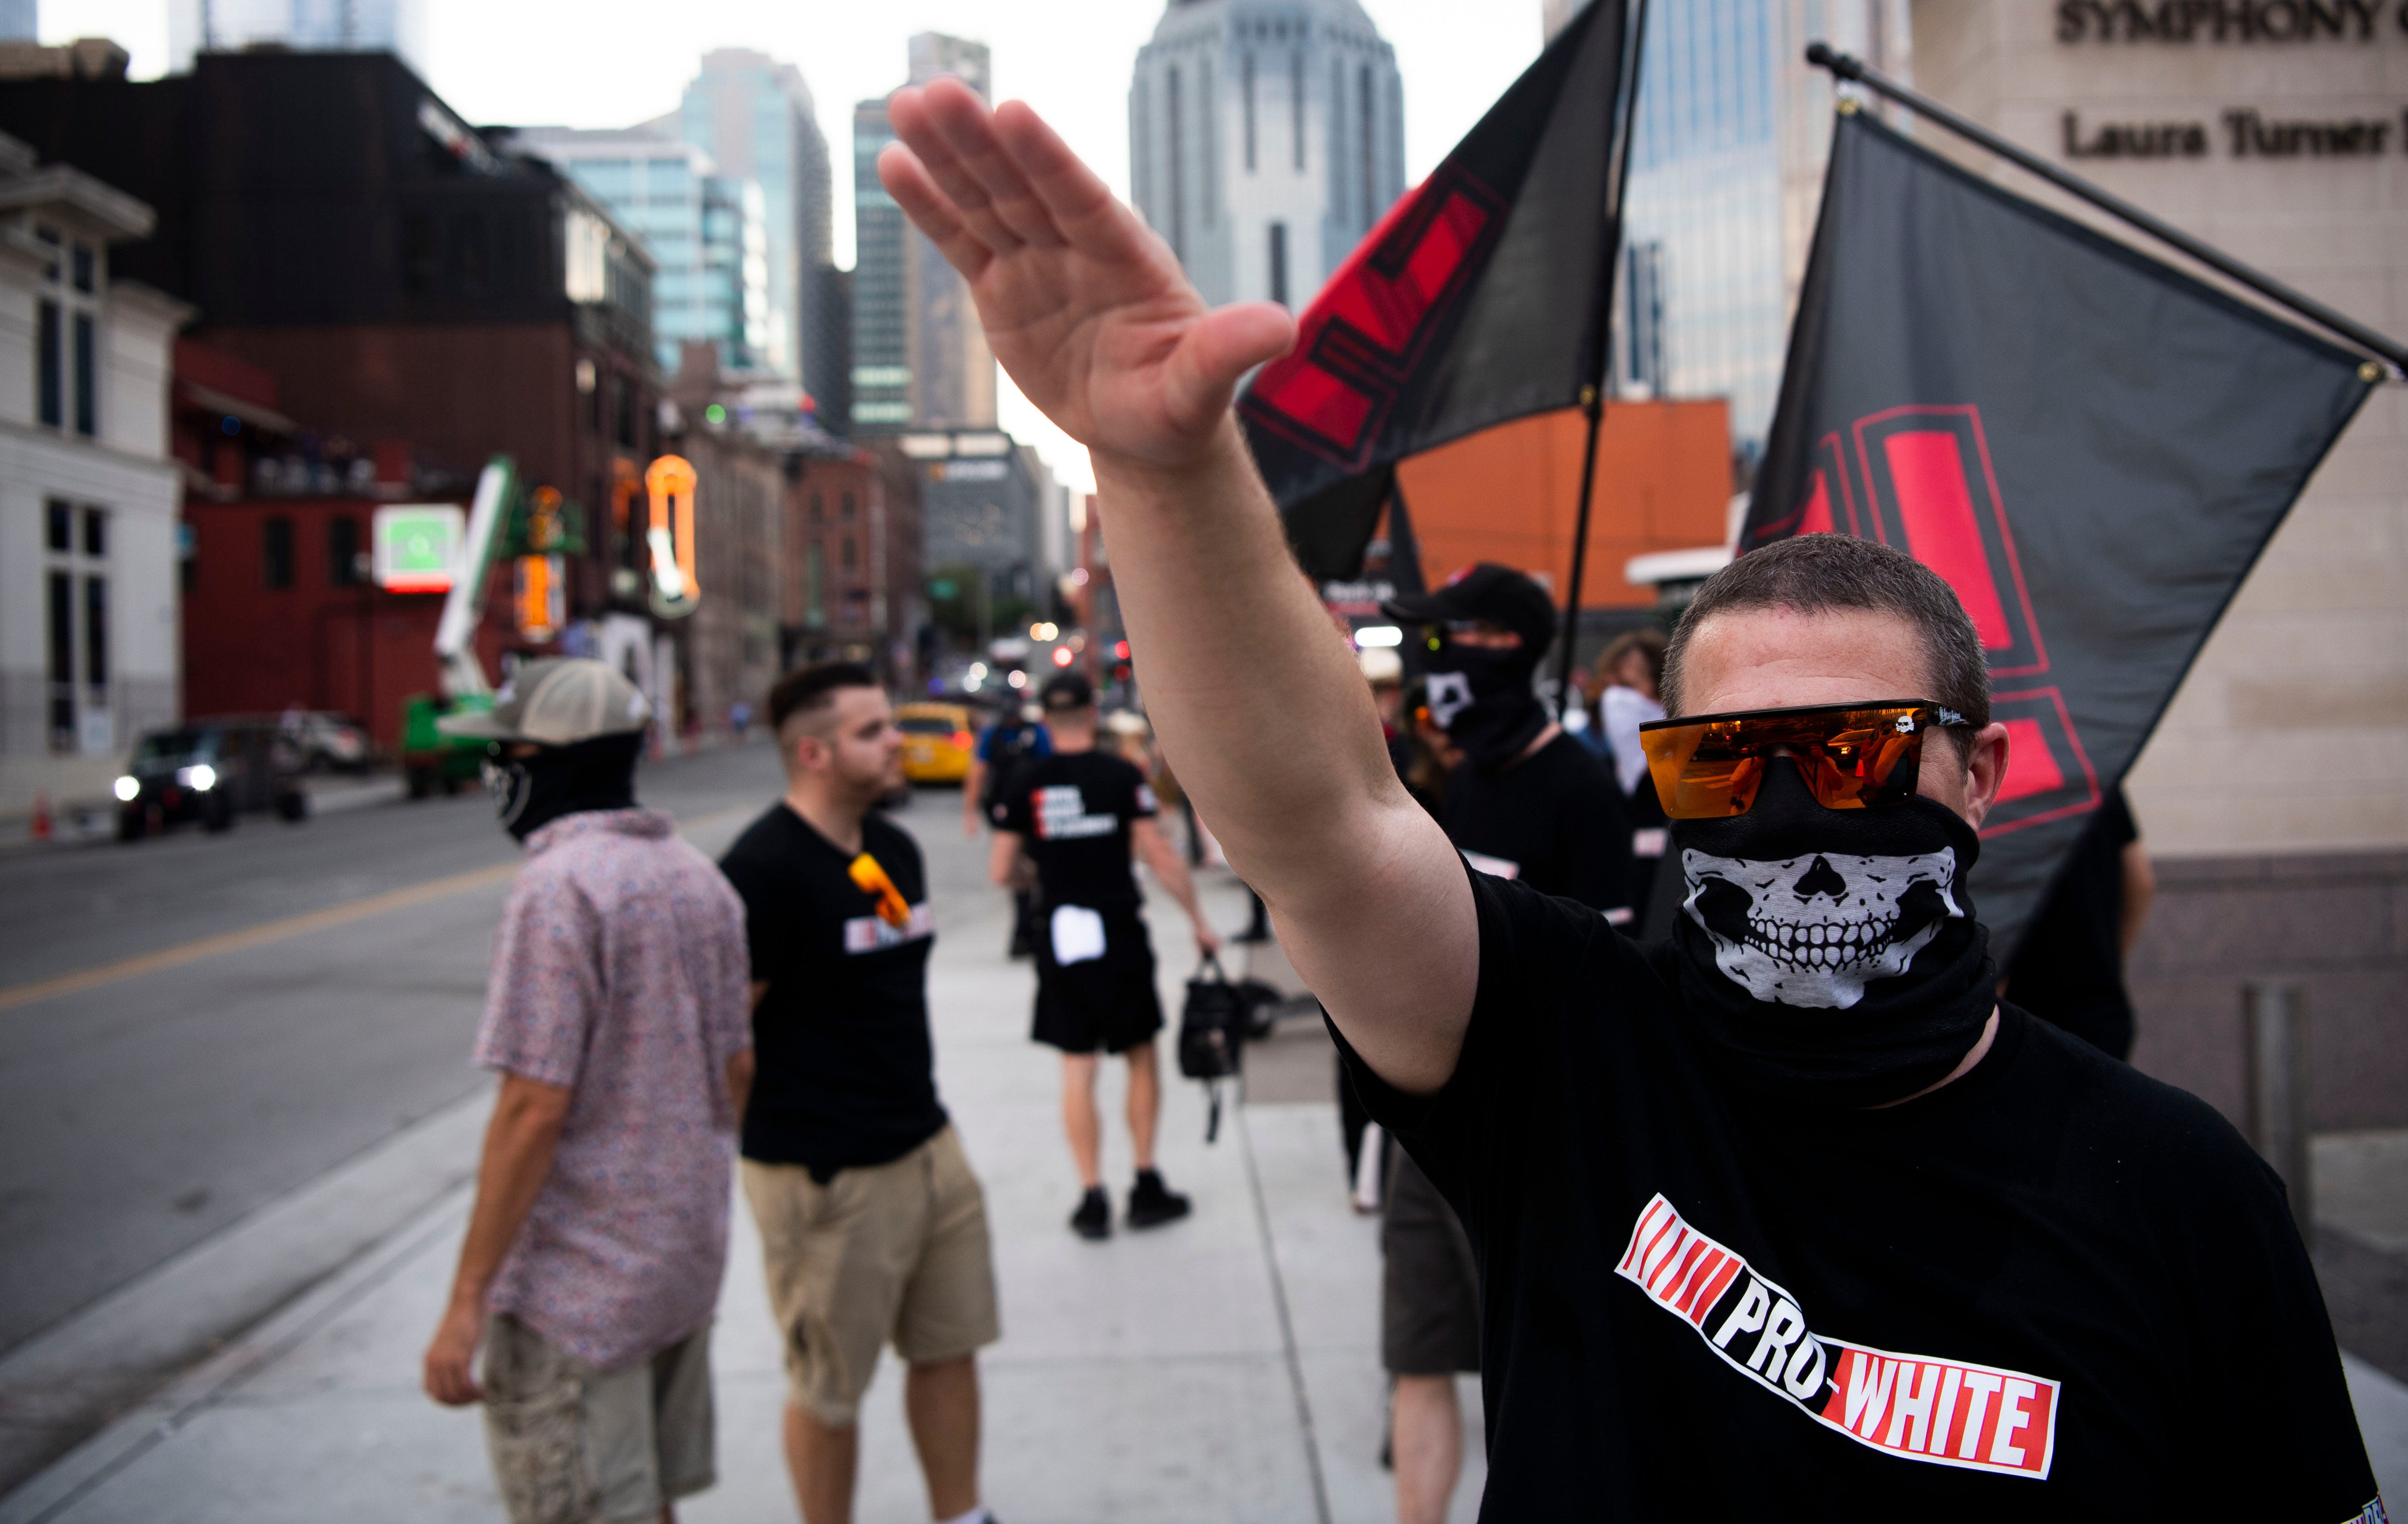 Freedom of speech is protected. We can still shame the neo-Nazis marching in Nashville.